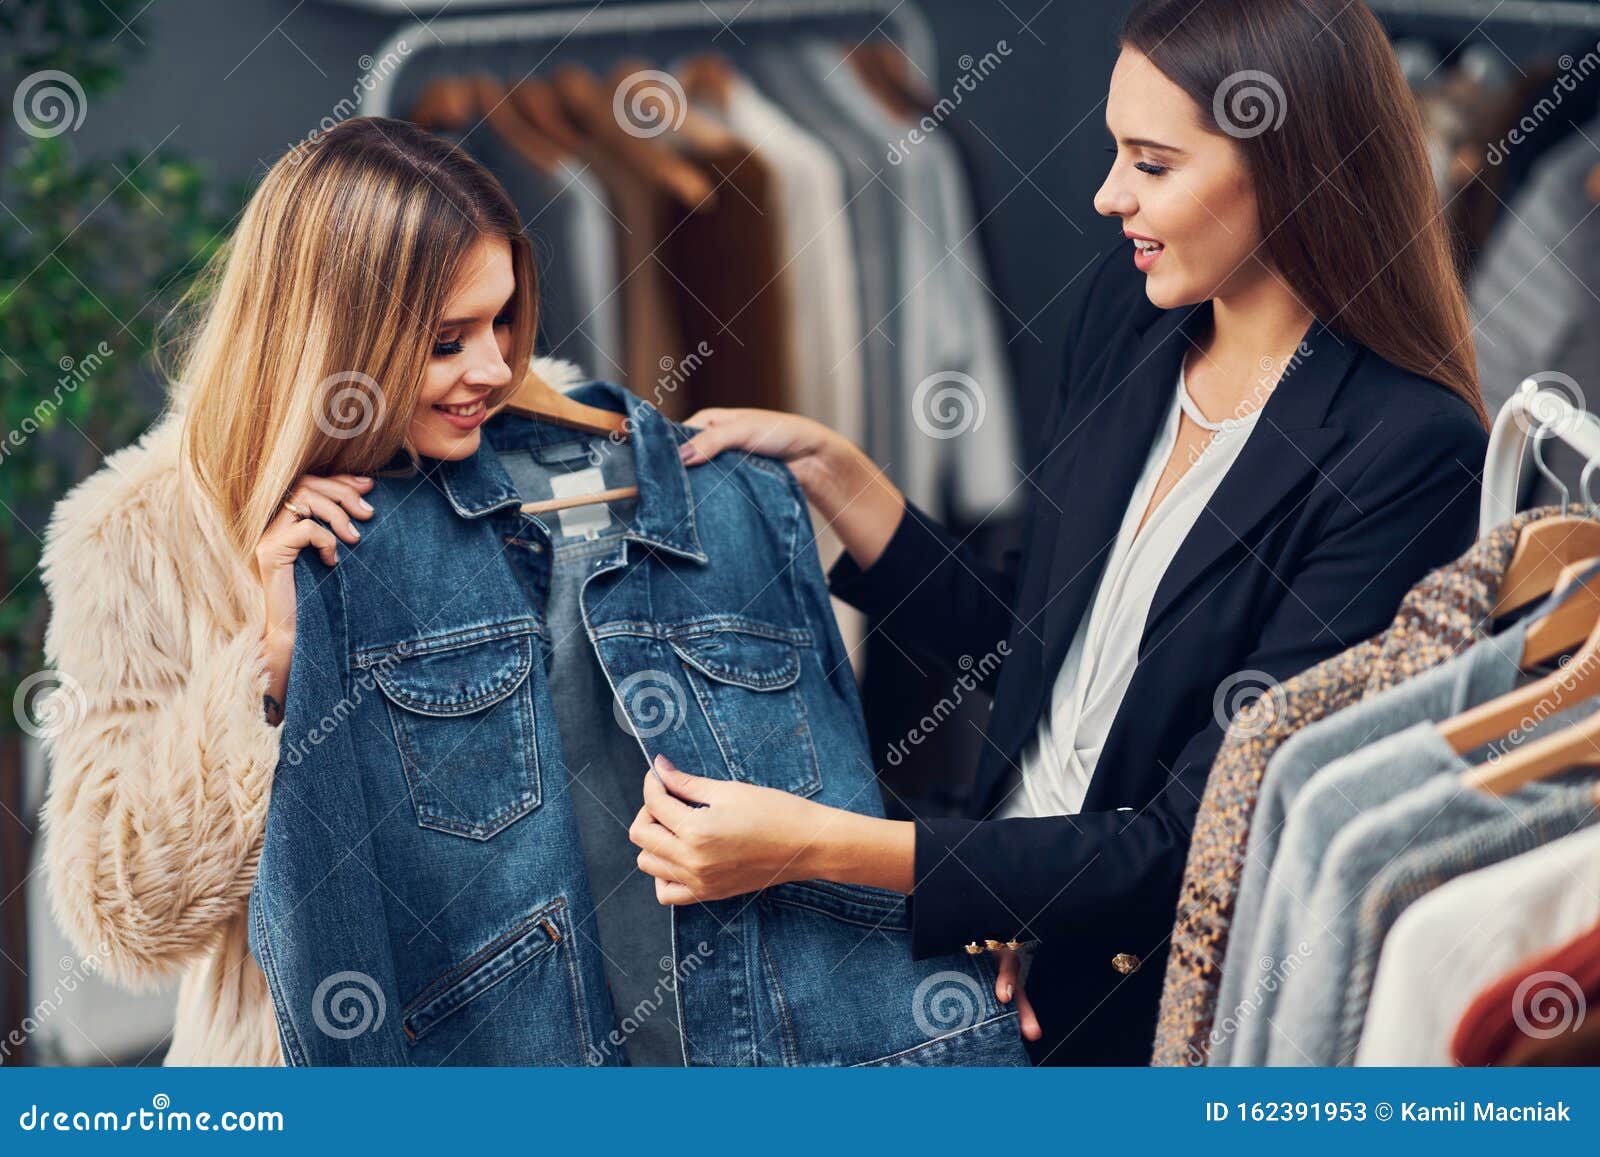 Shop Assistant Helping Customer in Boutique Stock Image - Image of ...